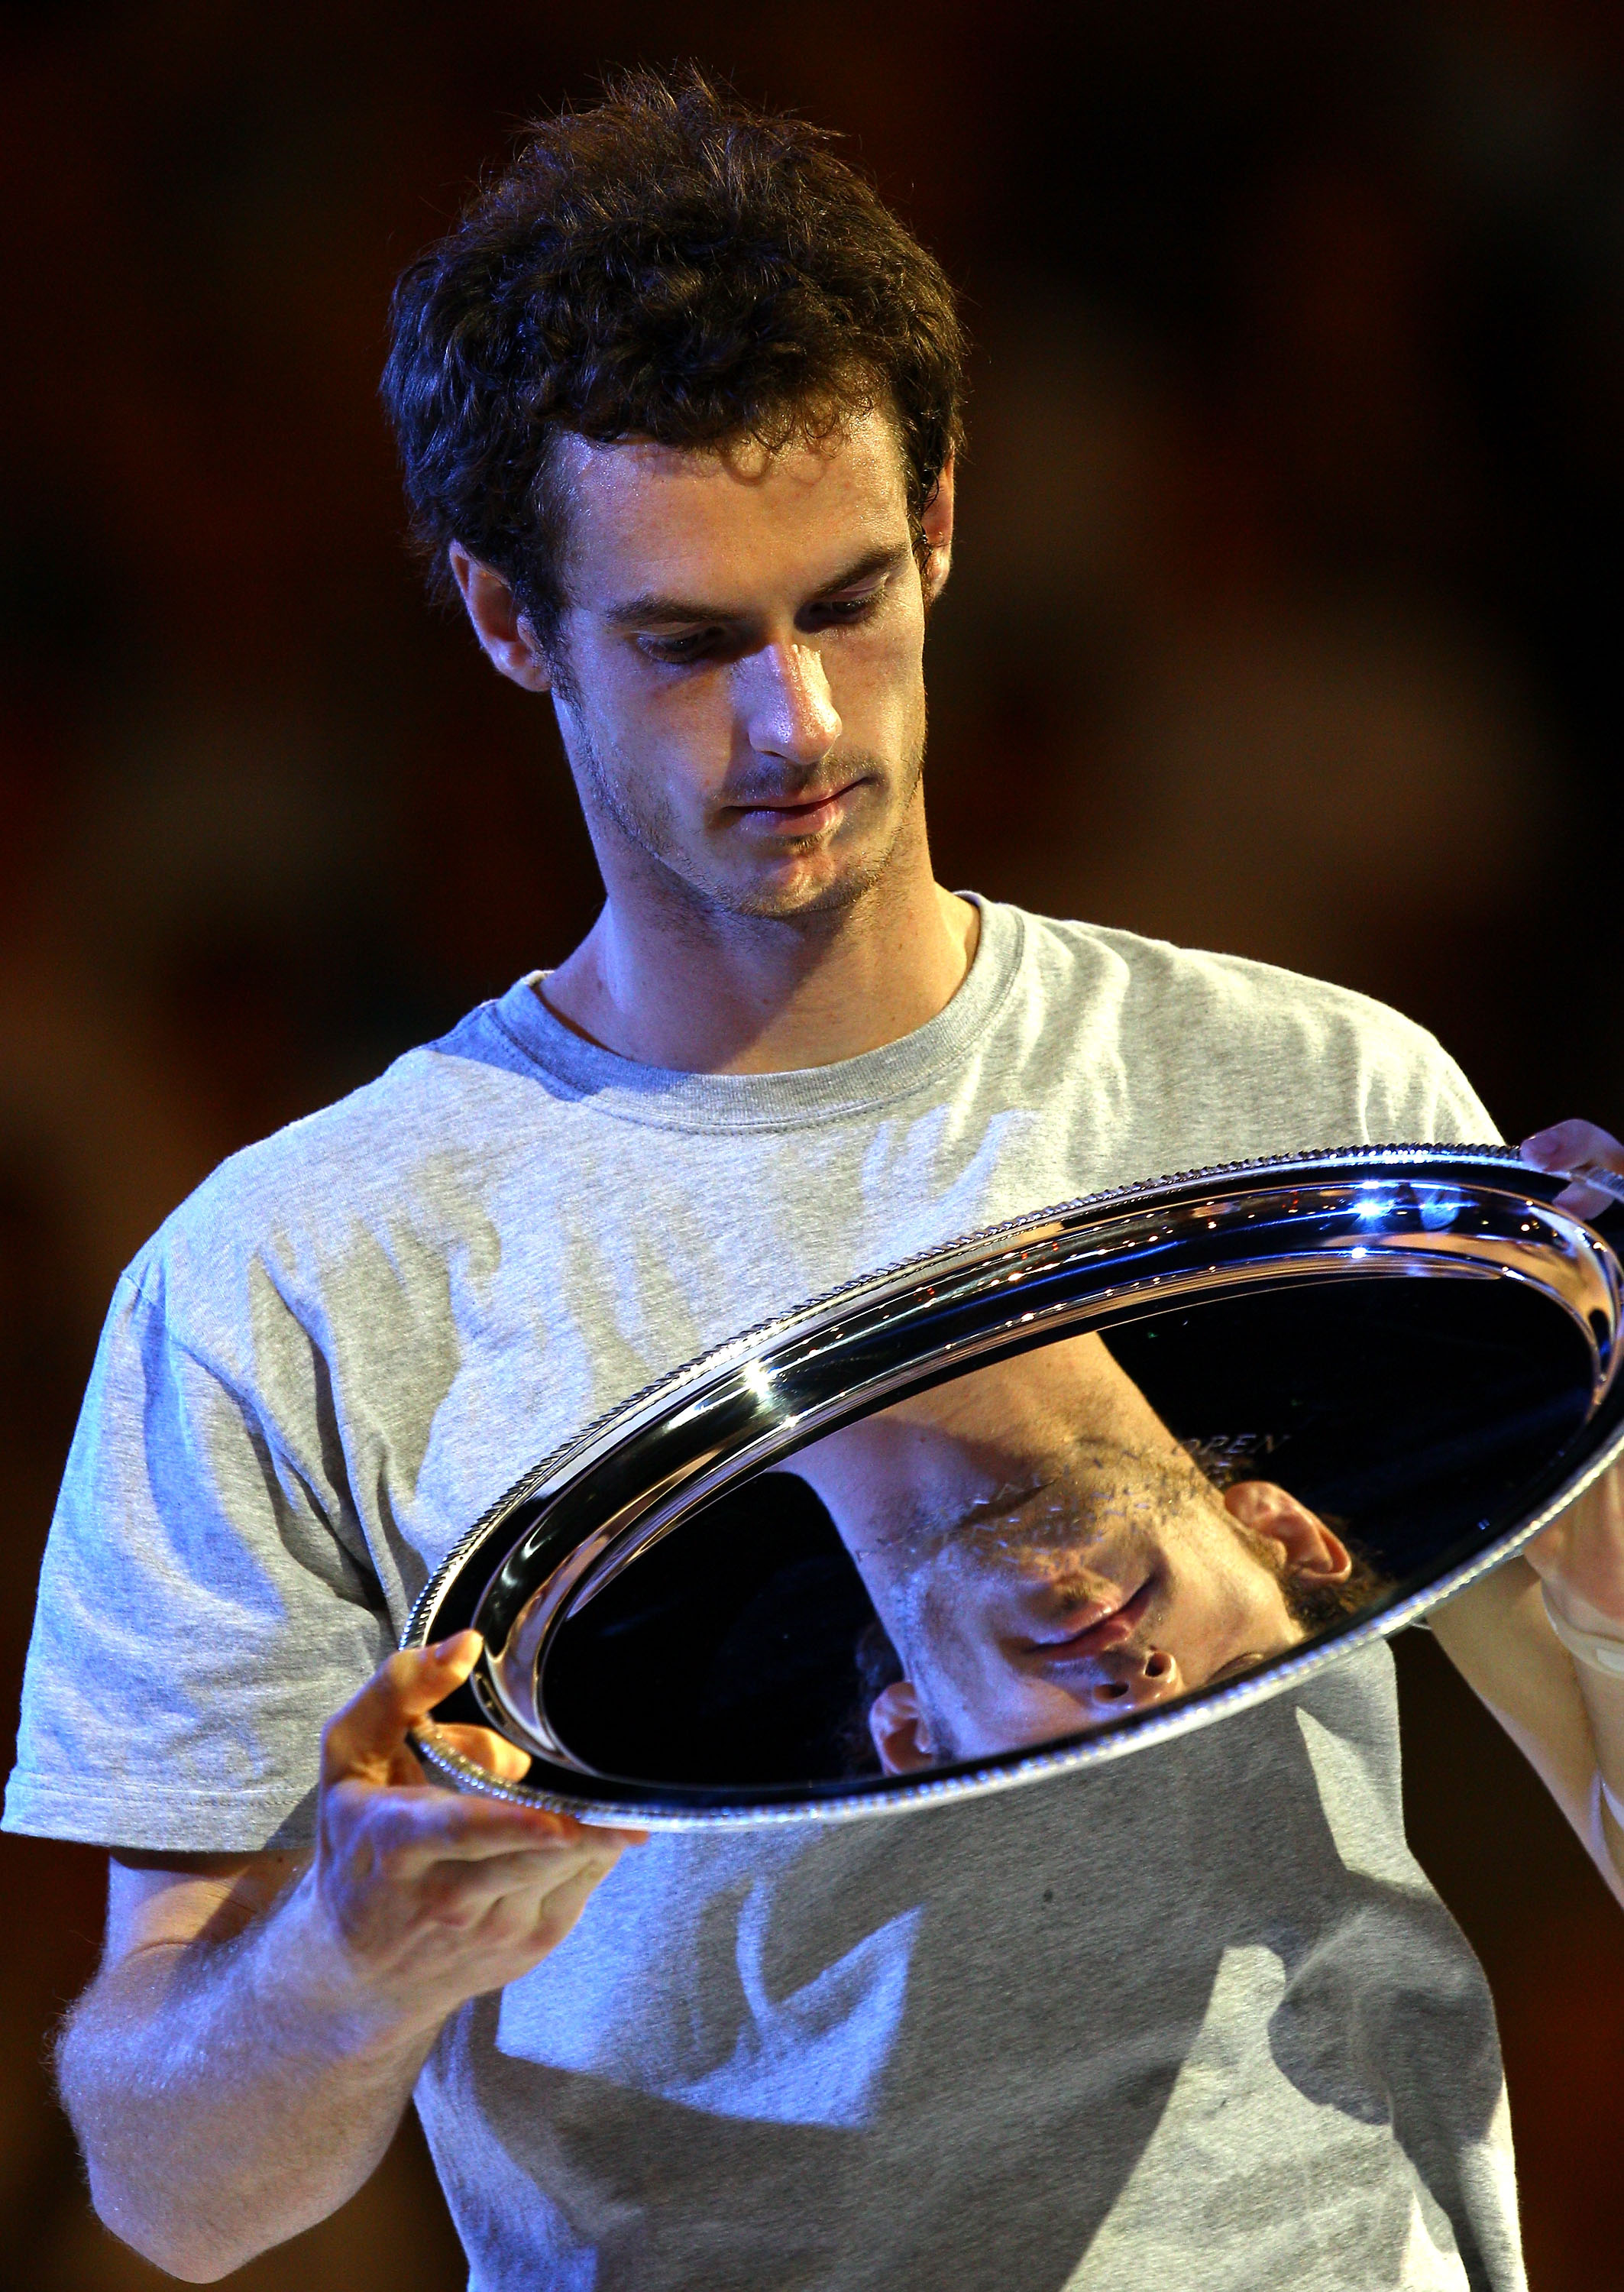 MELBOURNE, AUSTRALIA - JANUARY 30:  Andy Murray of Great Britain poses with the runners up trophy after losing his men's final match against Novak Djokovic of Serbia during day fourteen of the 2011 Australian Open at Melbourne Park on January 30, 2011 in